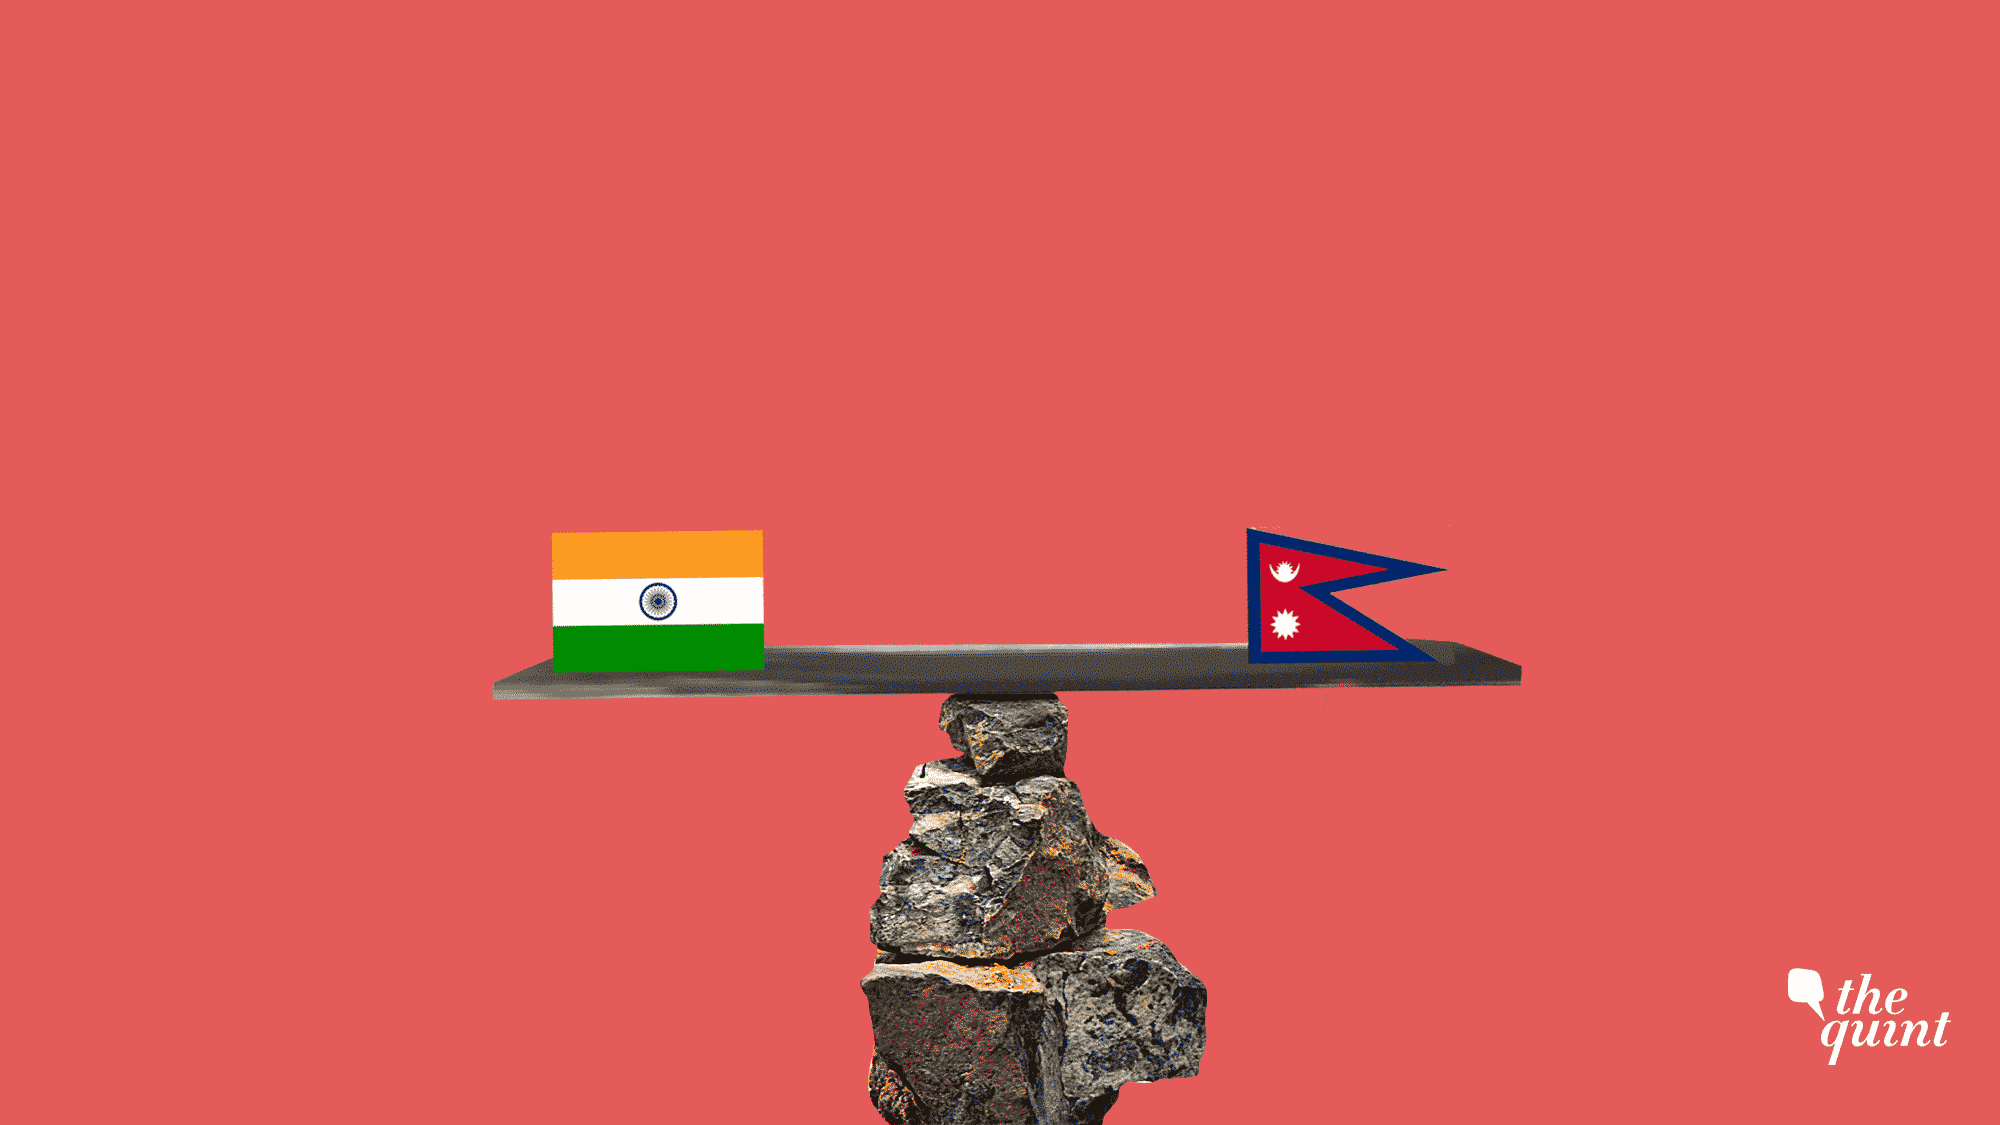 Rather than blaming the Oli government entirely, India may consider crucial factors in its bilateral relations with Nepal.